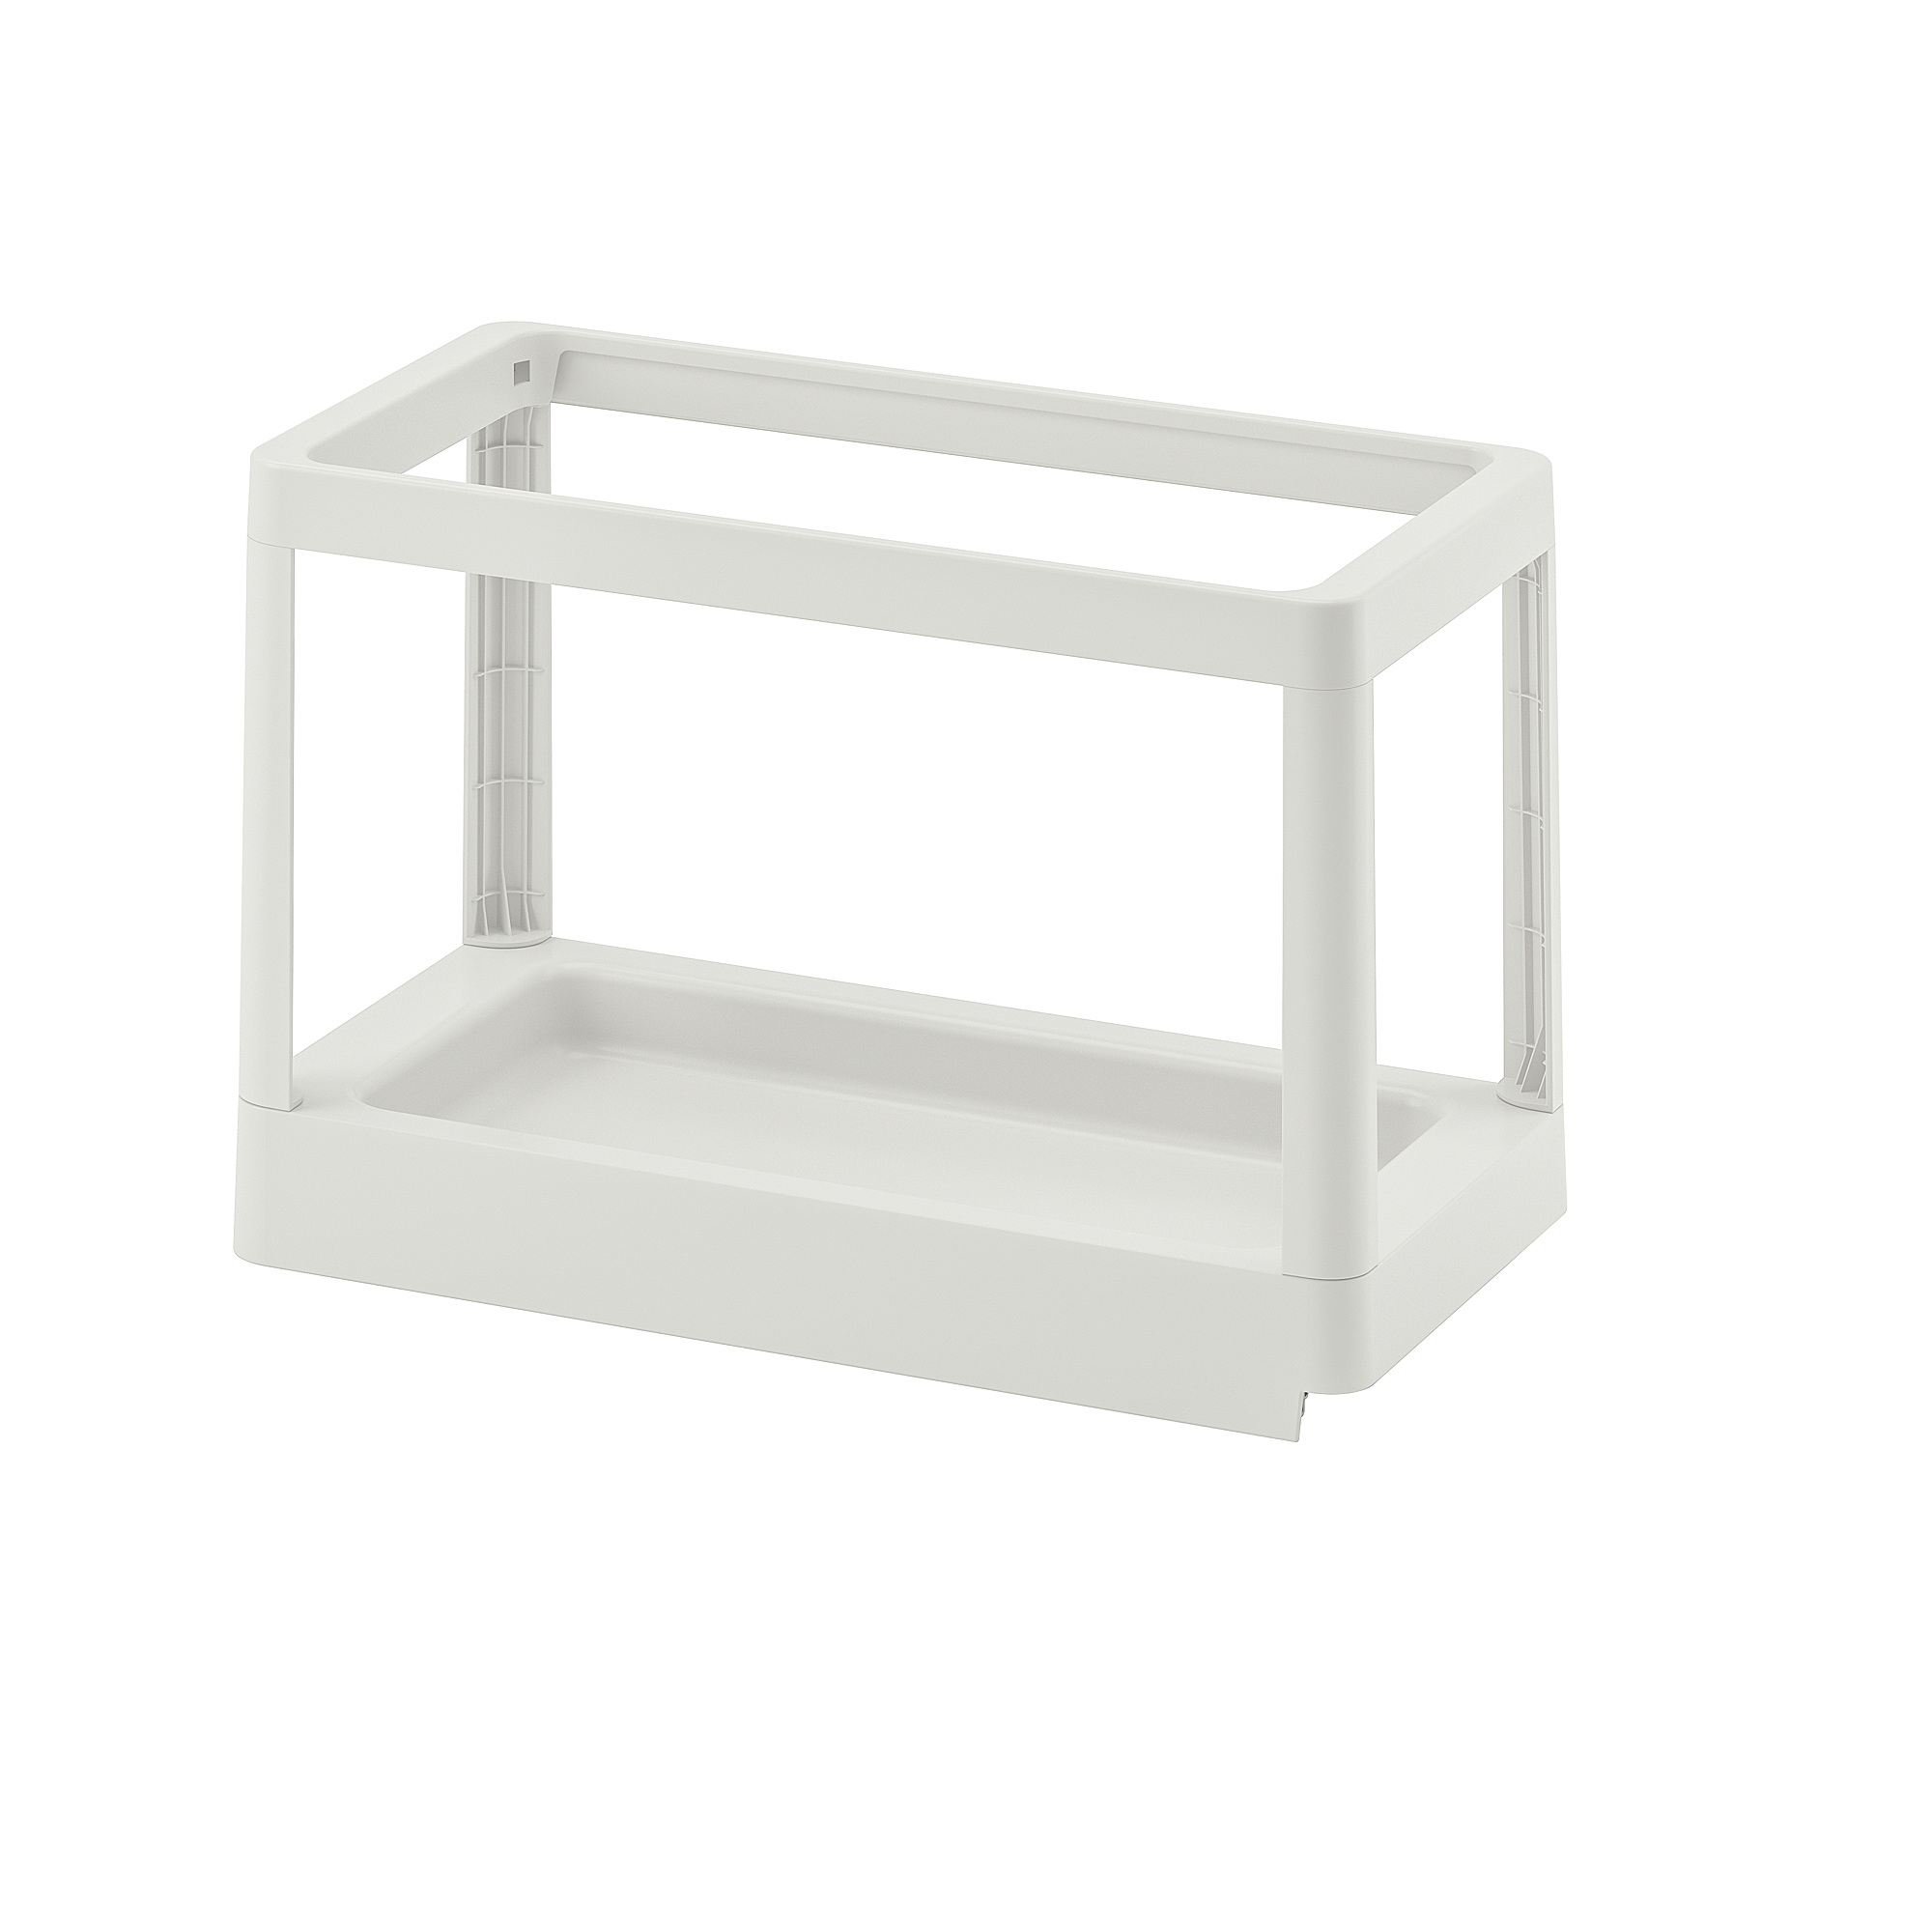 HÅLLBAR pull-out frame for waste sorting